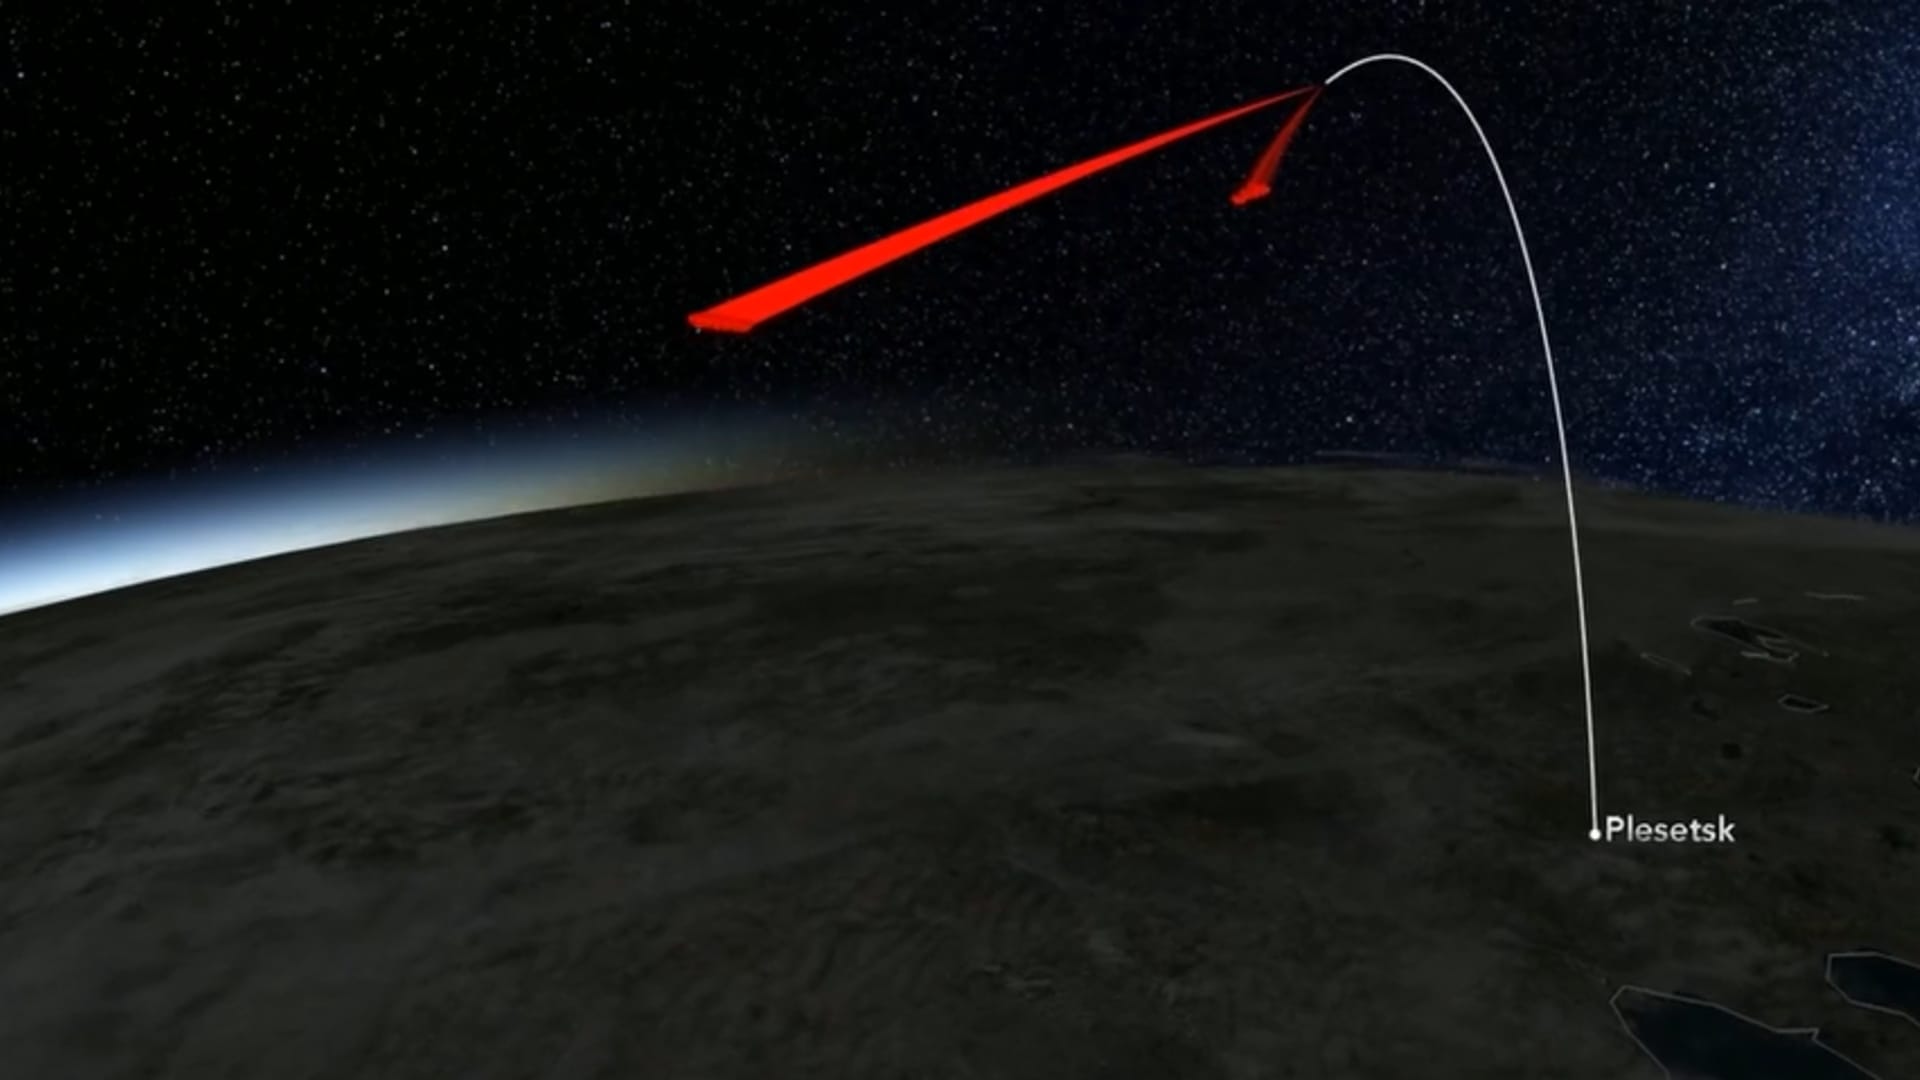 A software rendering shows a recreation of Russia's anti-satellite weapons test and the destruction of satellite Kosmos 1408, with the debris field in red.